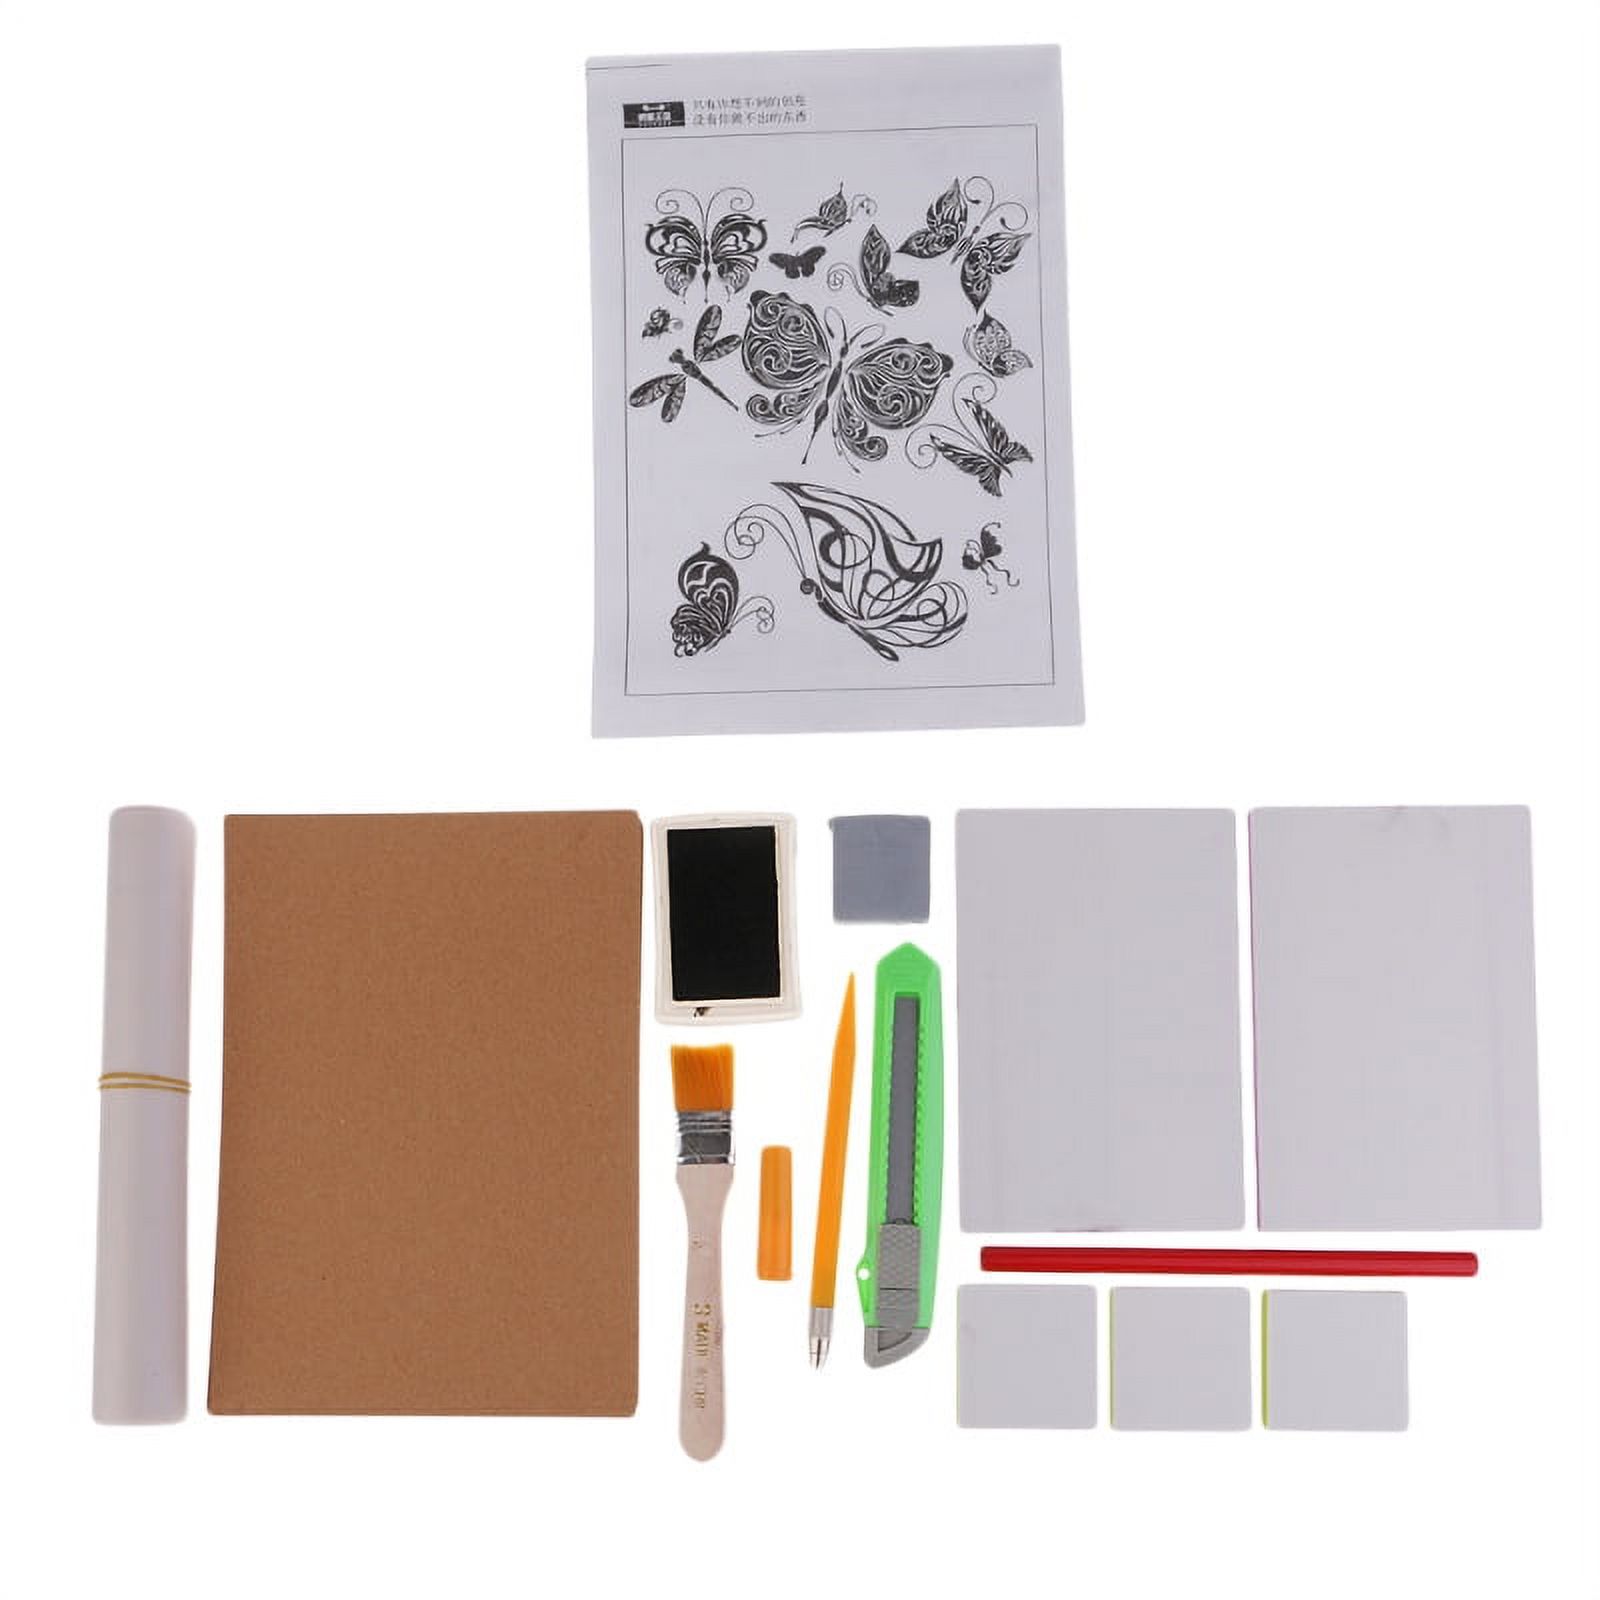 DIY Rubber Stamp Carving Kit Rubber Carving Tools Set For  Scrapbooking,Cards Making Handmade Project 